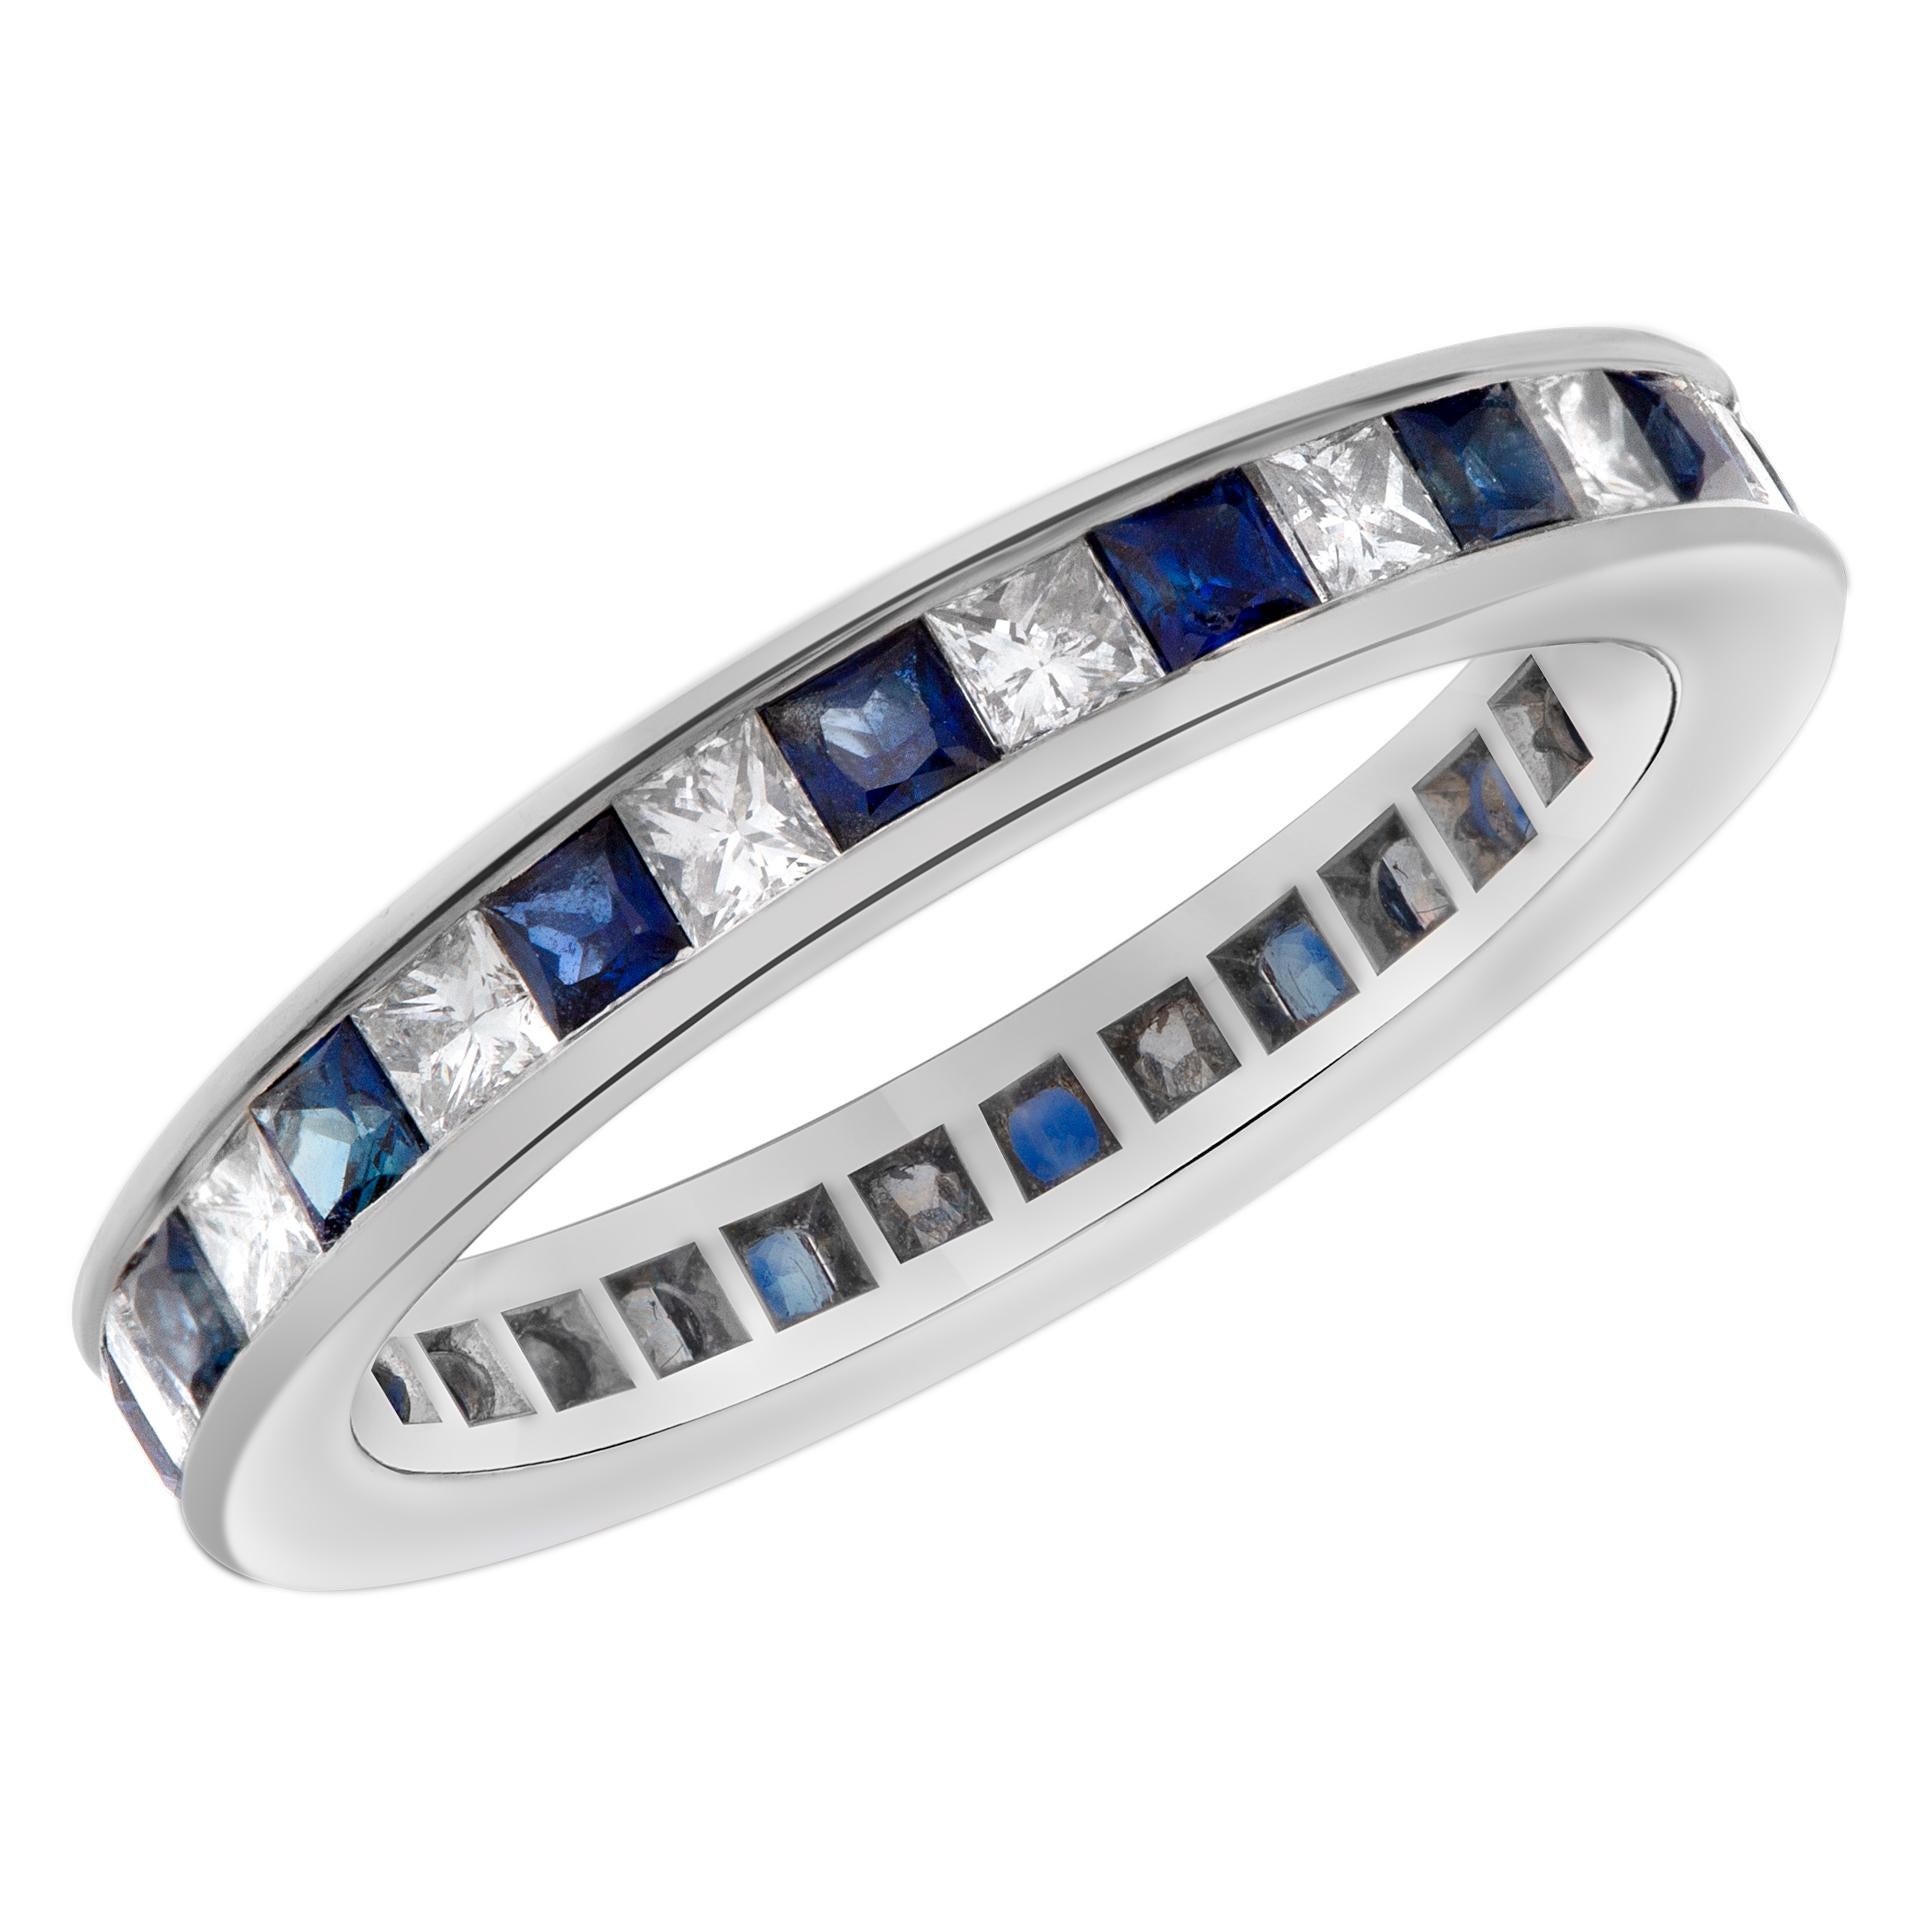 Diamond Eternity Band and Ring with Sapphire in Platinum; 1 Carat in F-G Color V In Excellent Condition For Sale In Surfside, FL